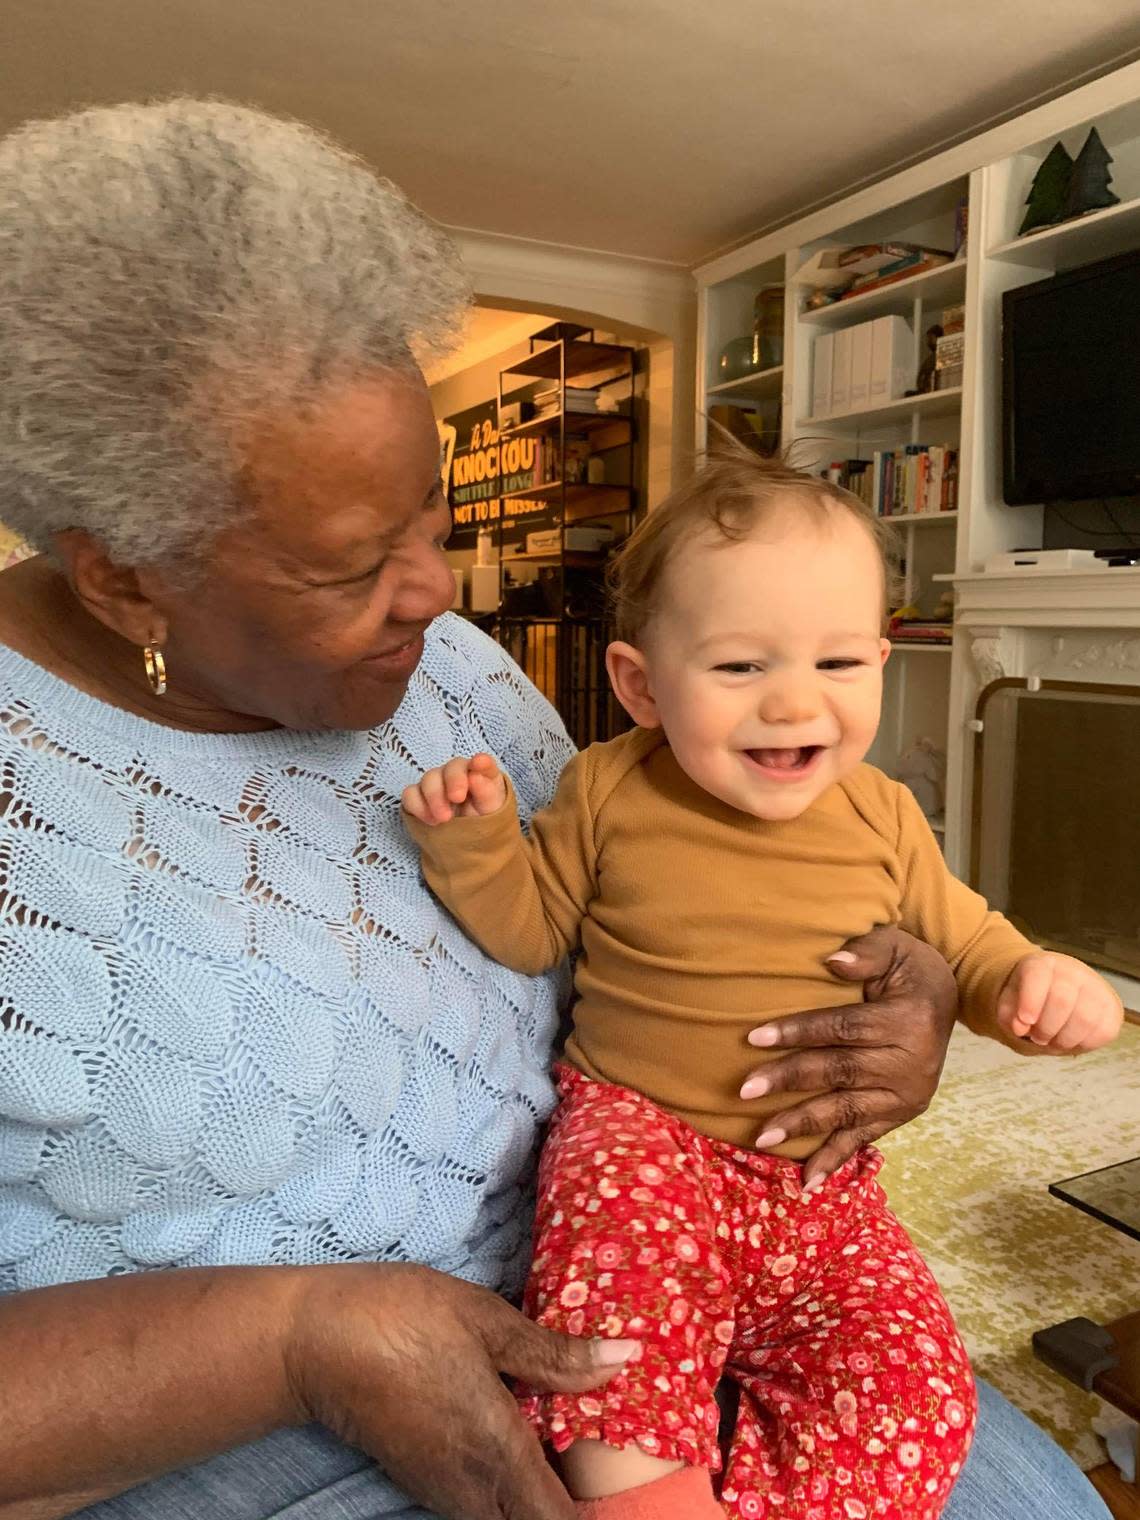 Bea Hines with her 10-month-old great-granddaughter, Loretta Jane, on April 14, 2021. Loretta was born during the pandemic and lives in New York. Bea flew to New York to meet her for the first time.